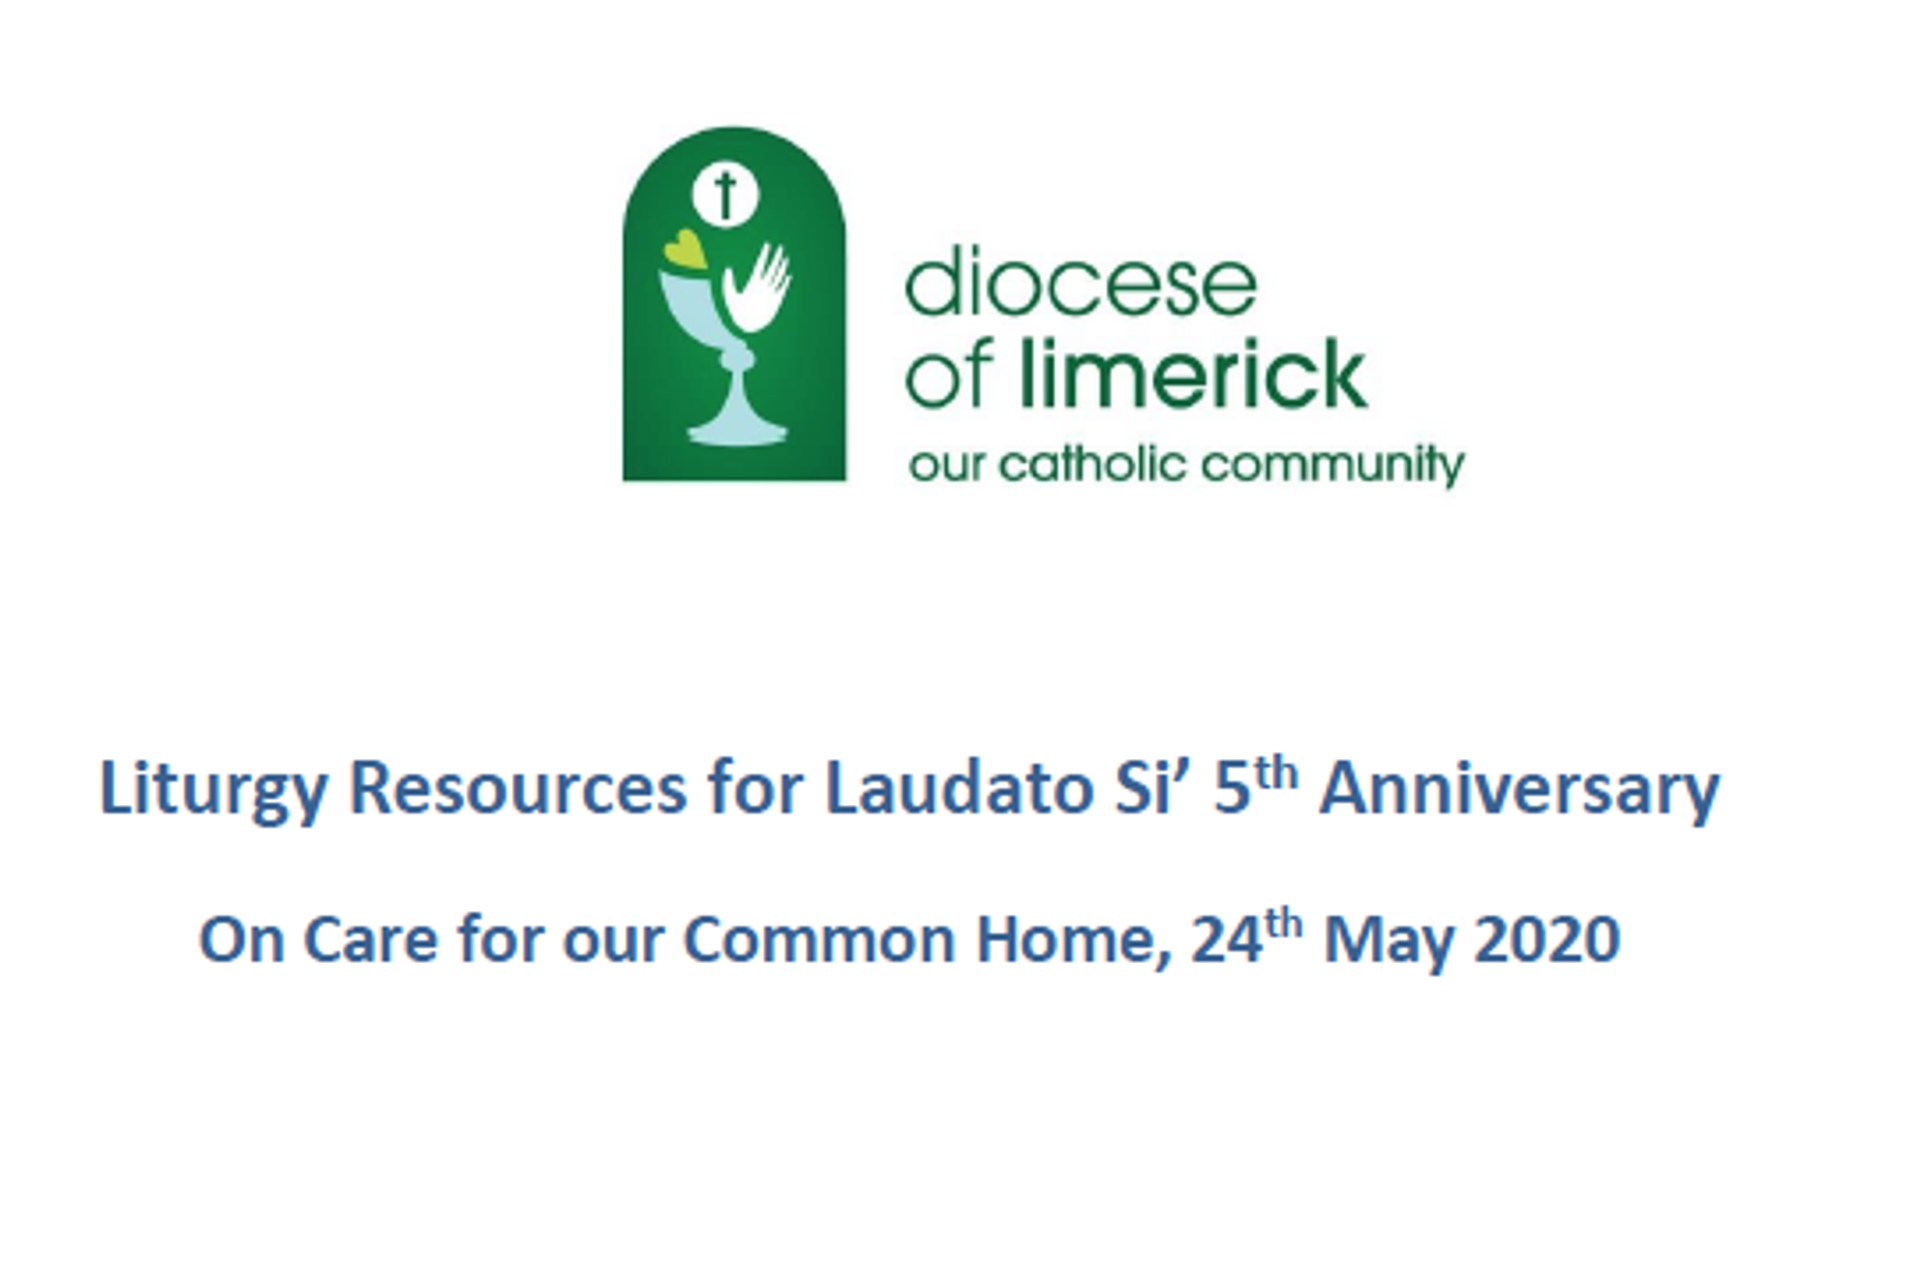 Liturgy Resources for Laudato Si' 5th Anniversary